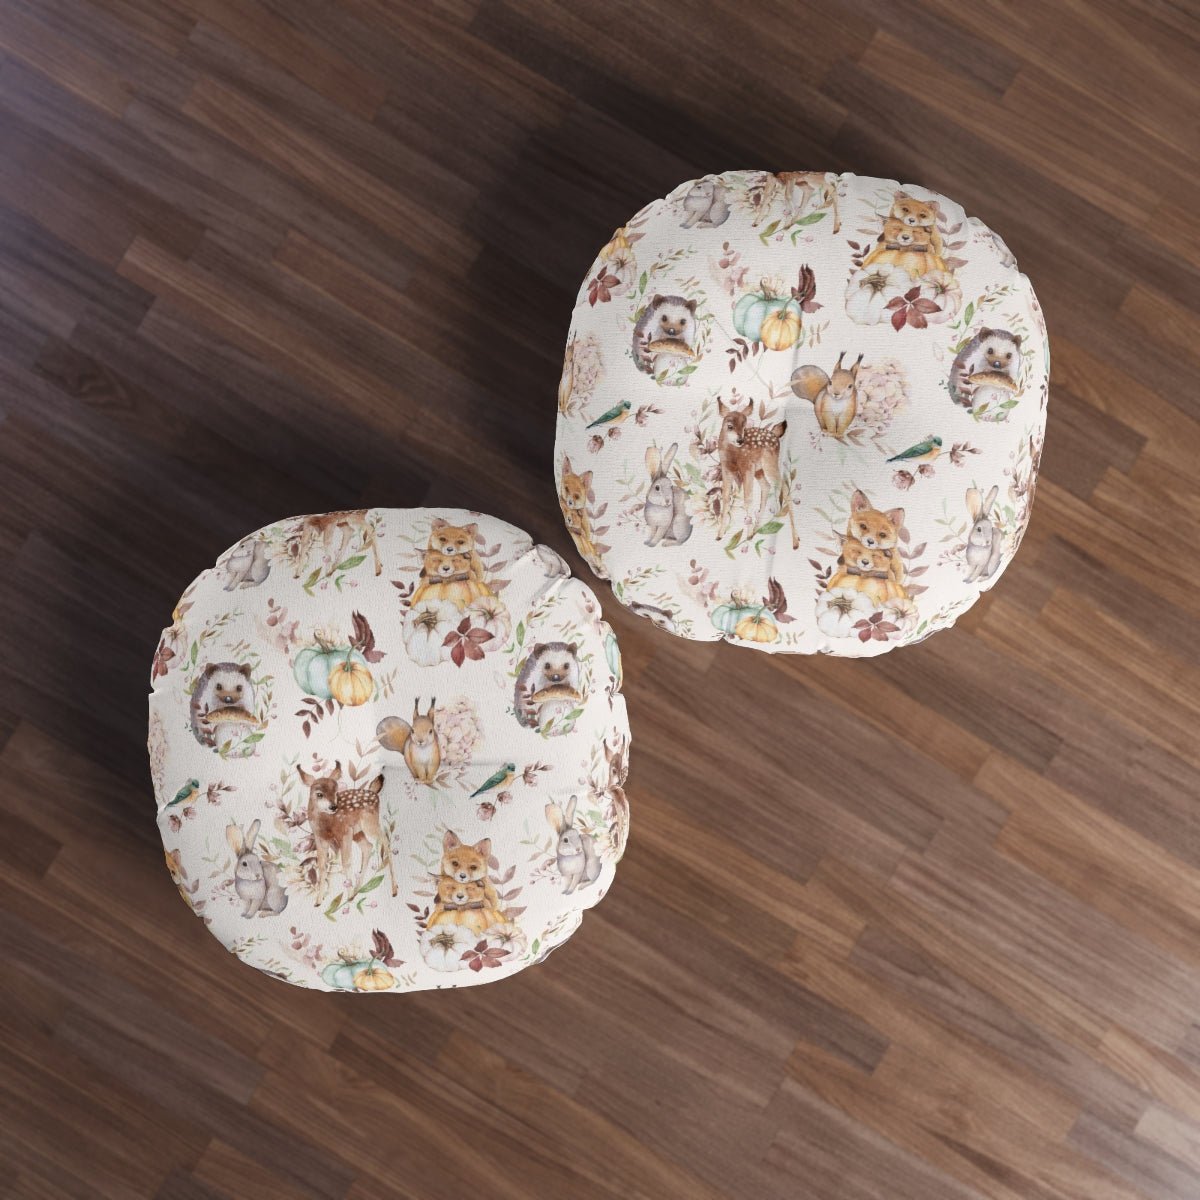 Woodland Animals Round Tufted Floor Pillow - Puffin Lime